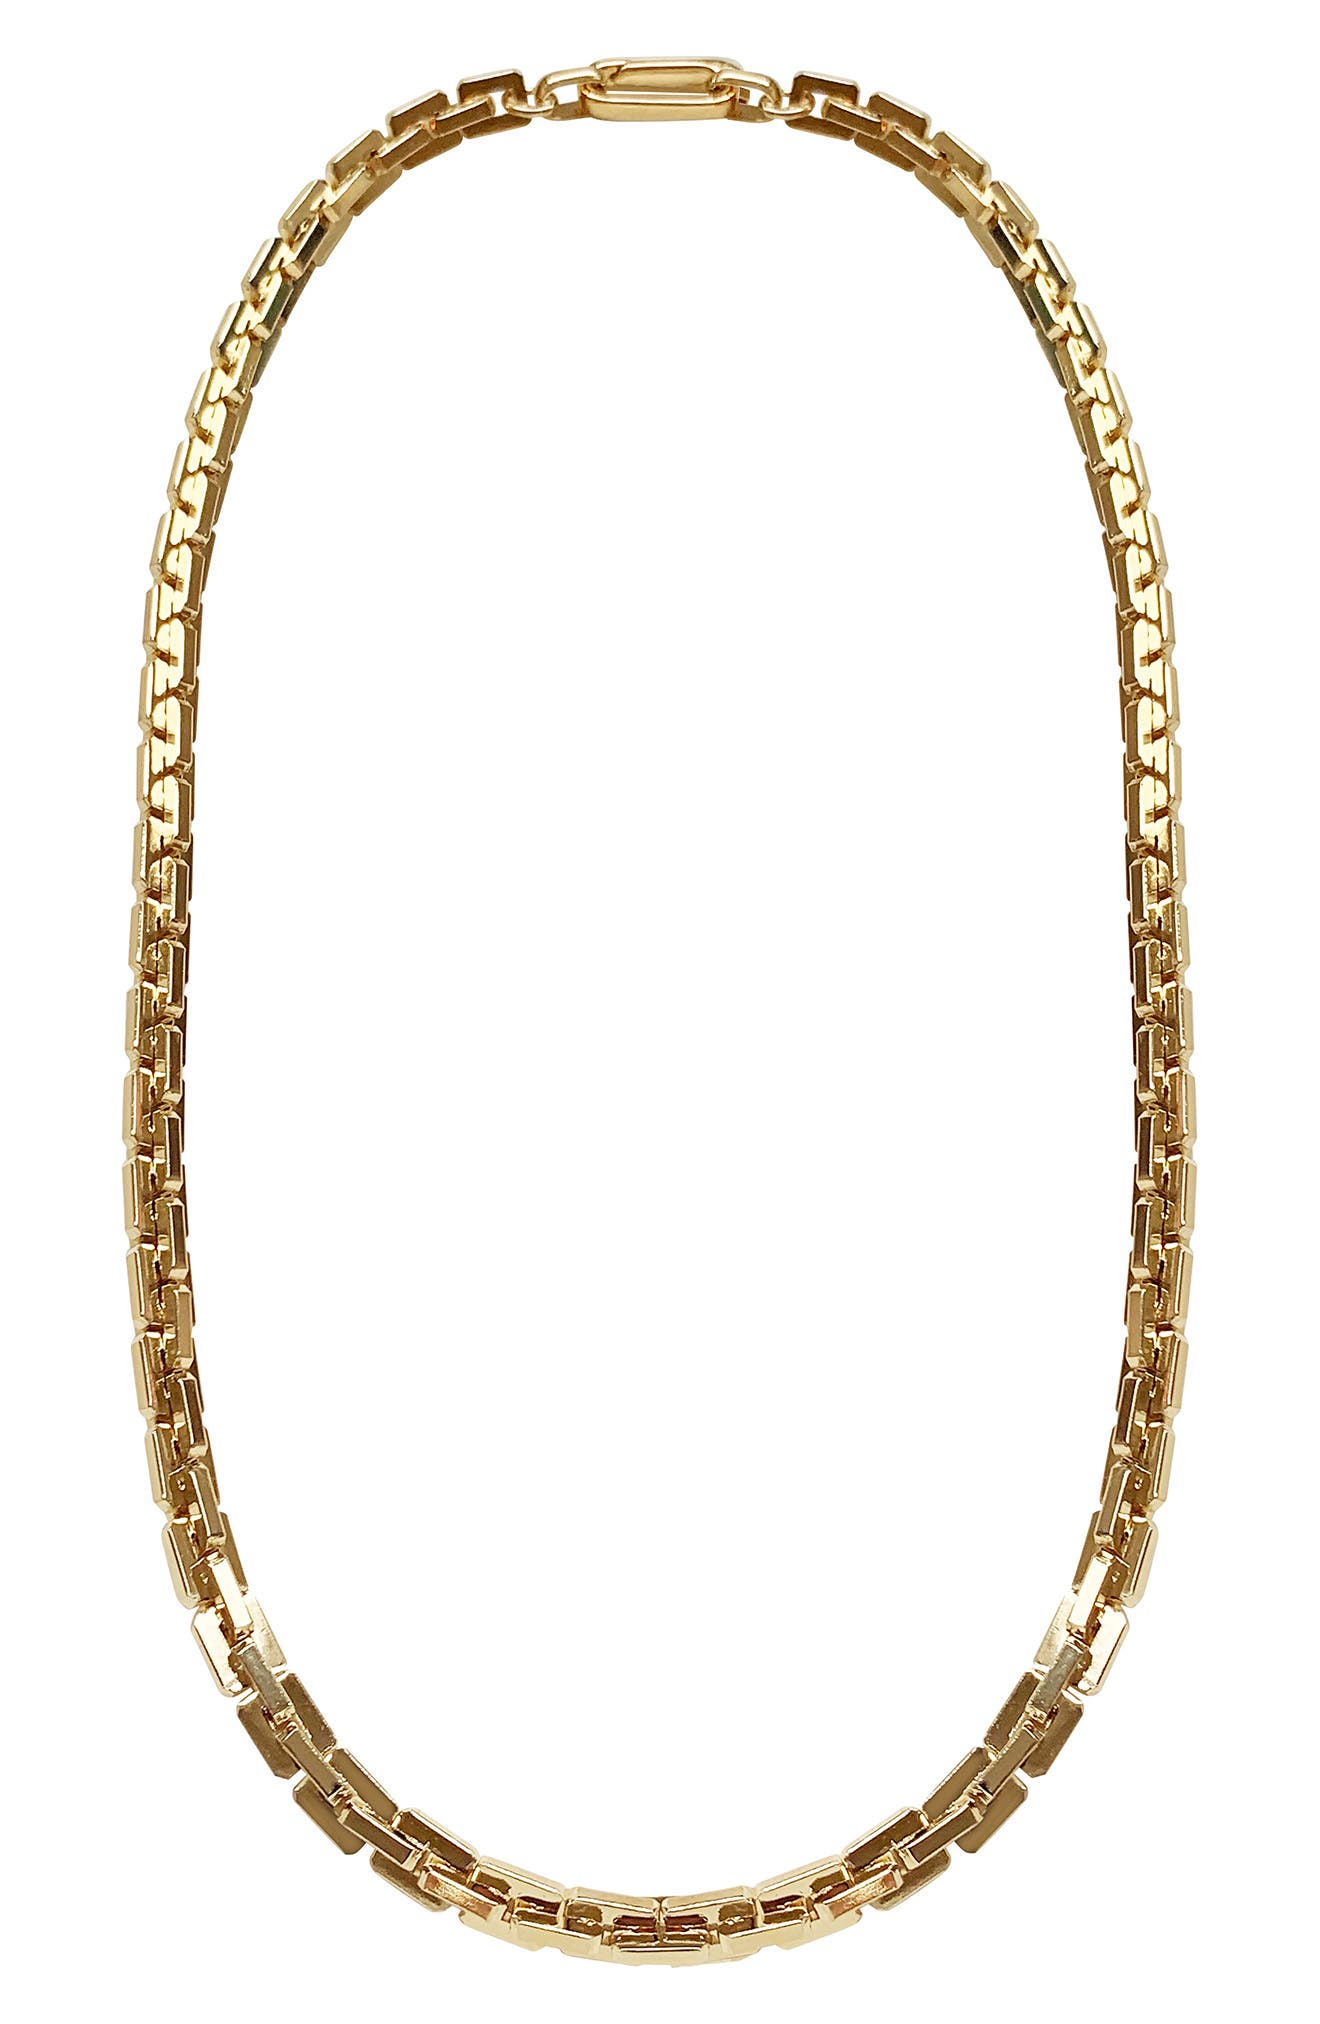 Laura Lombardi Greca Chain Necklace in Brass at Nordstrom